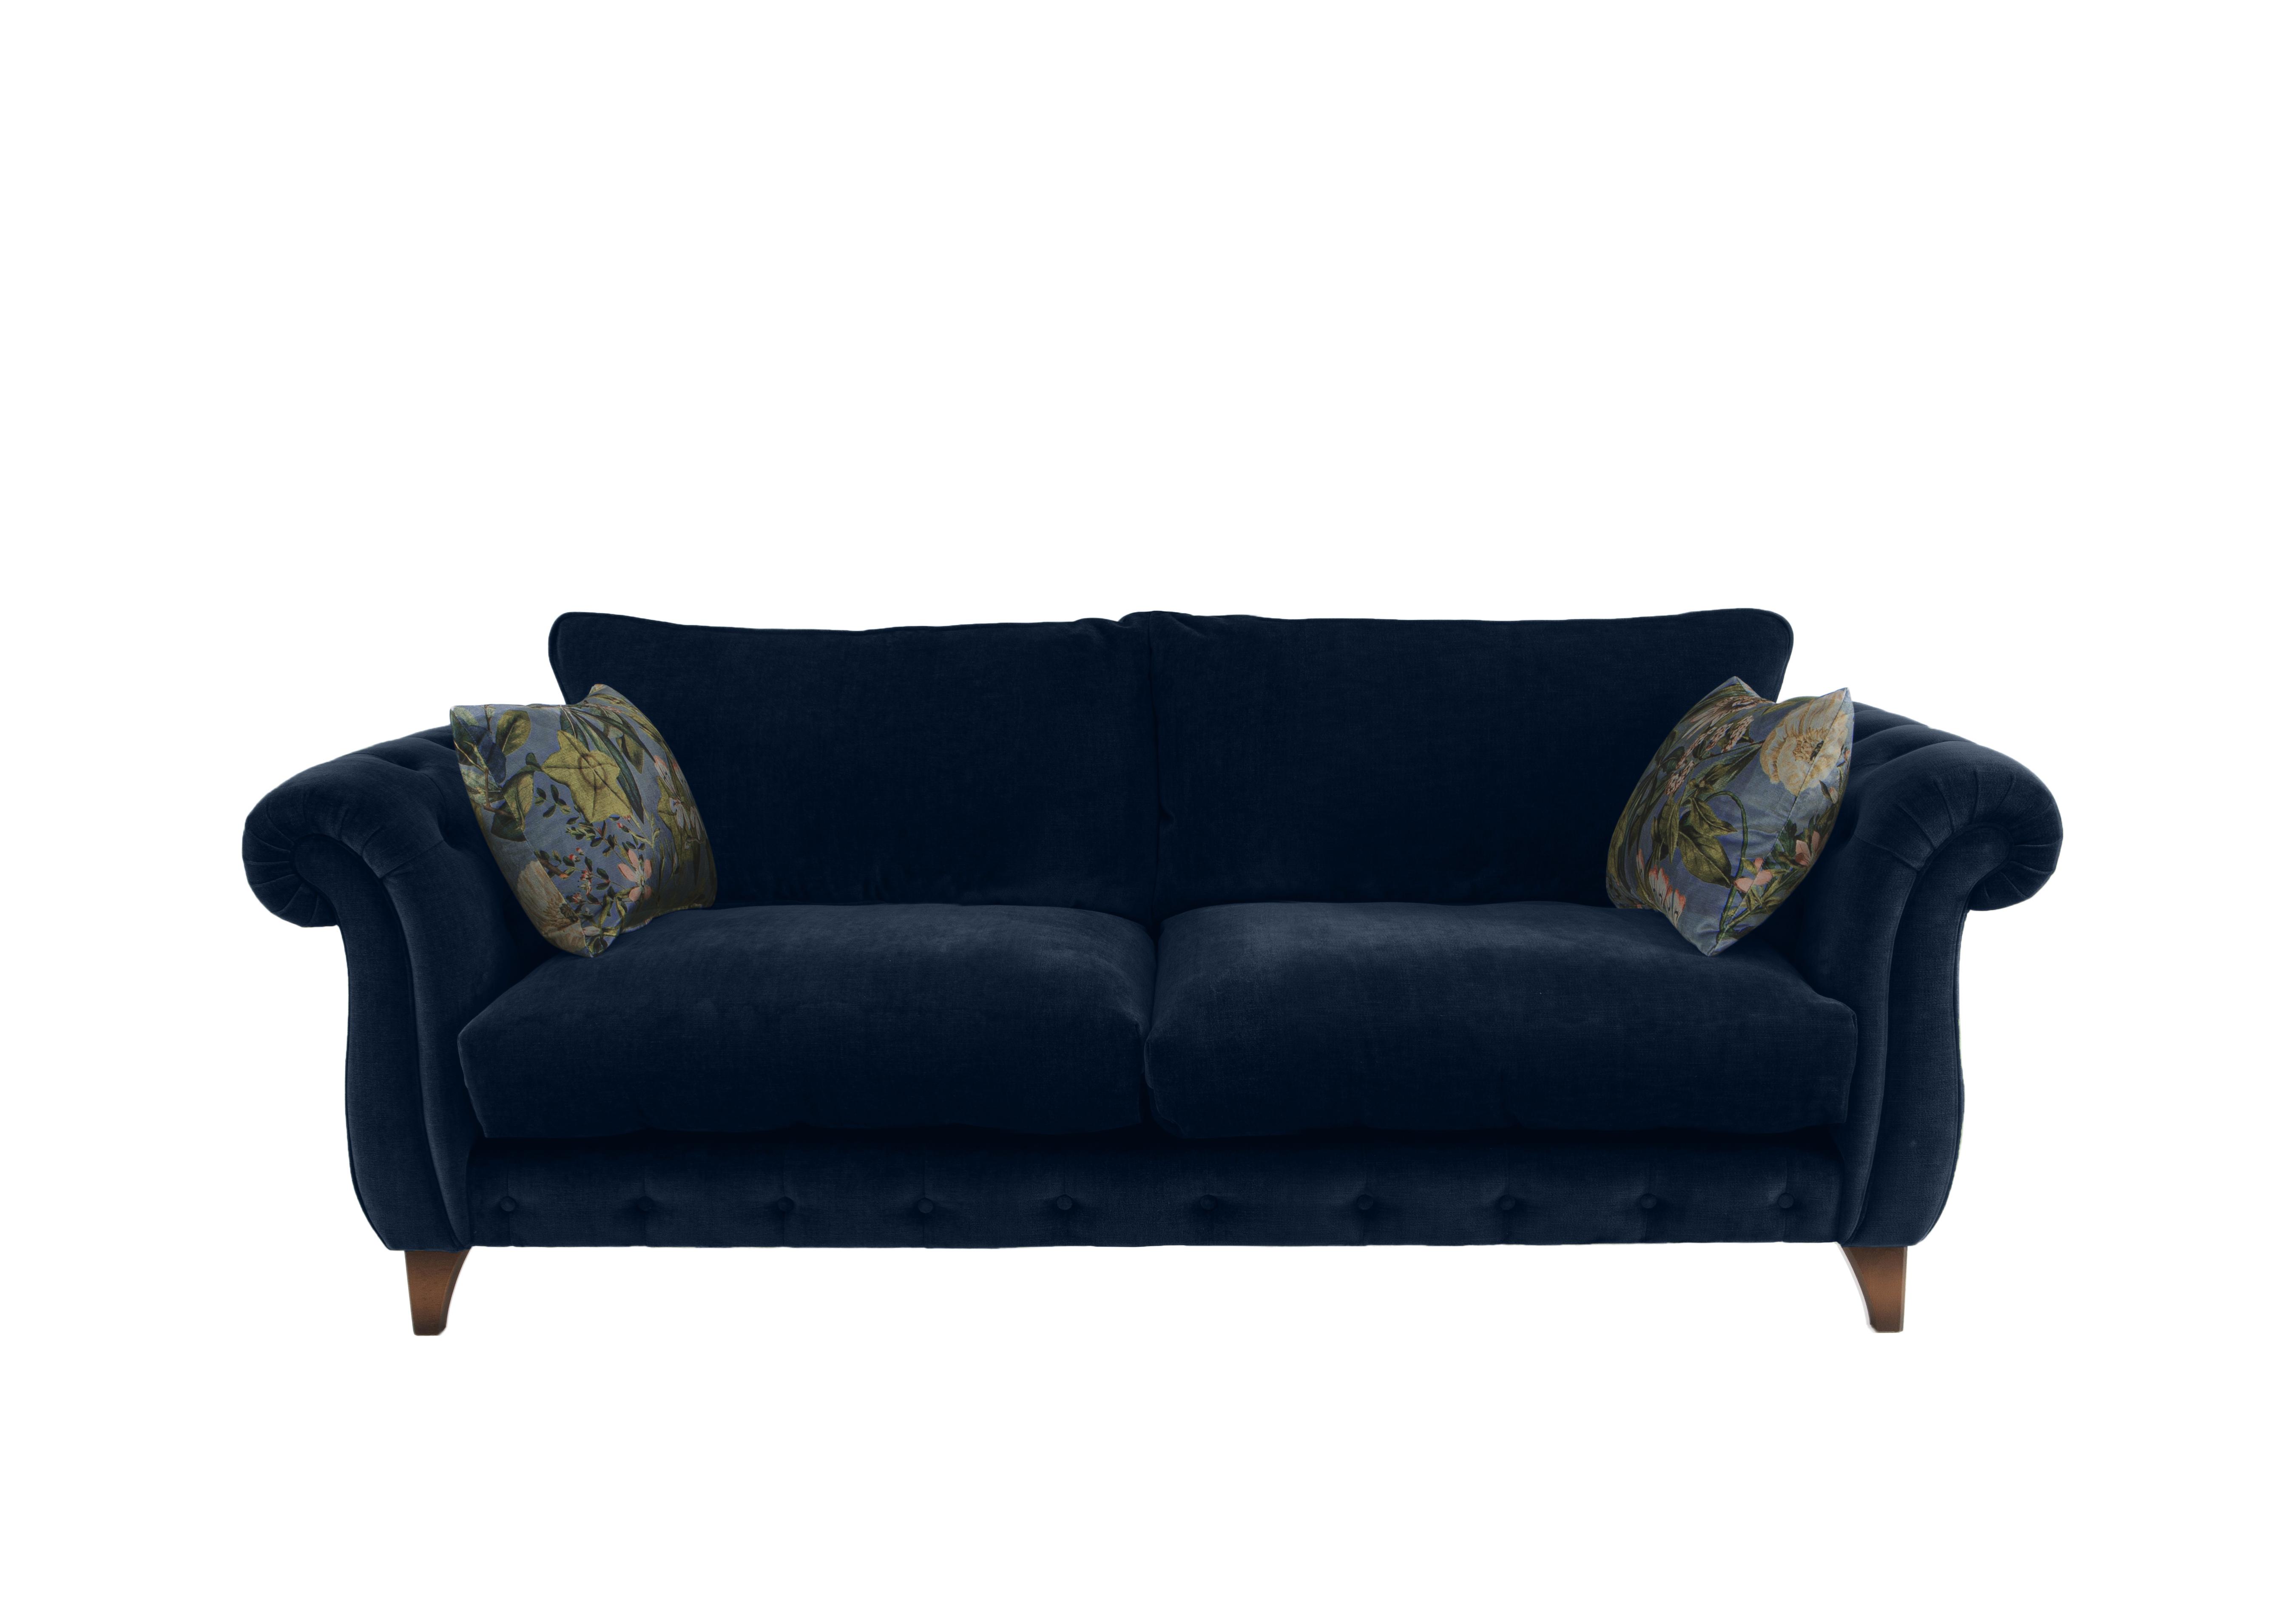 Boutique Palace Fabric 2 Seater Classic Back Sofa in Oasis Navy on Furniture Village